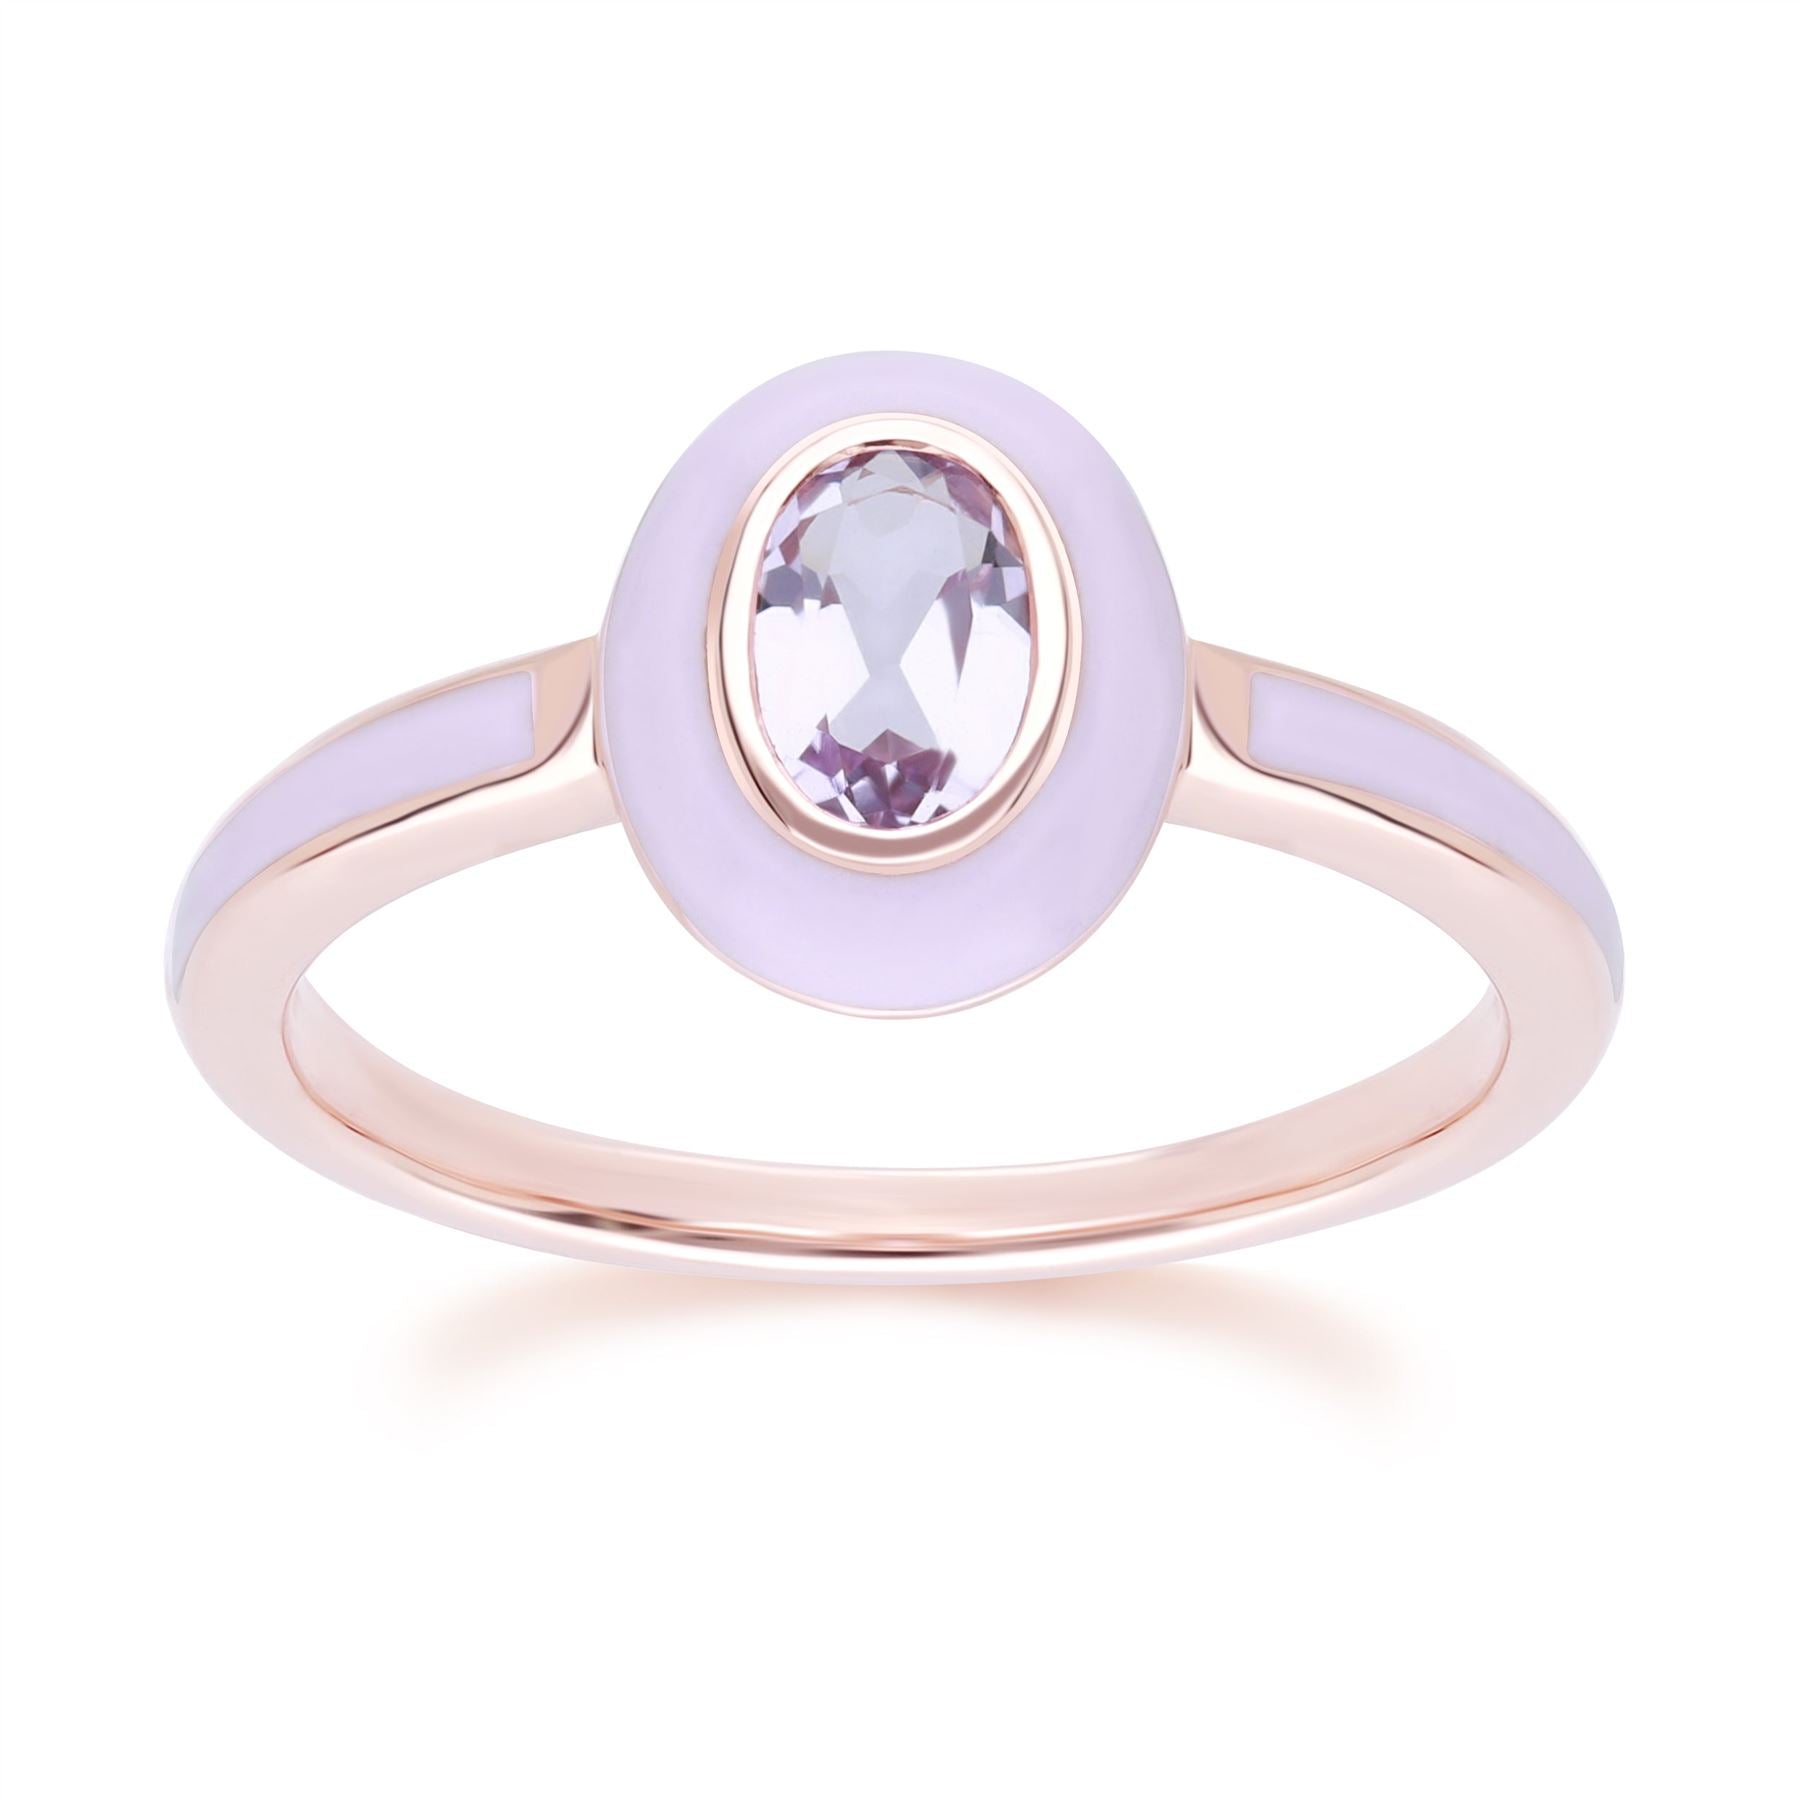 Violet Enamel Ring with Pink Amethyst 18ct Rose Gold Plated 